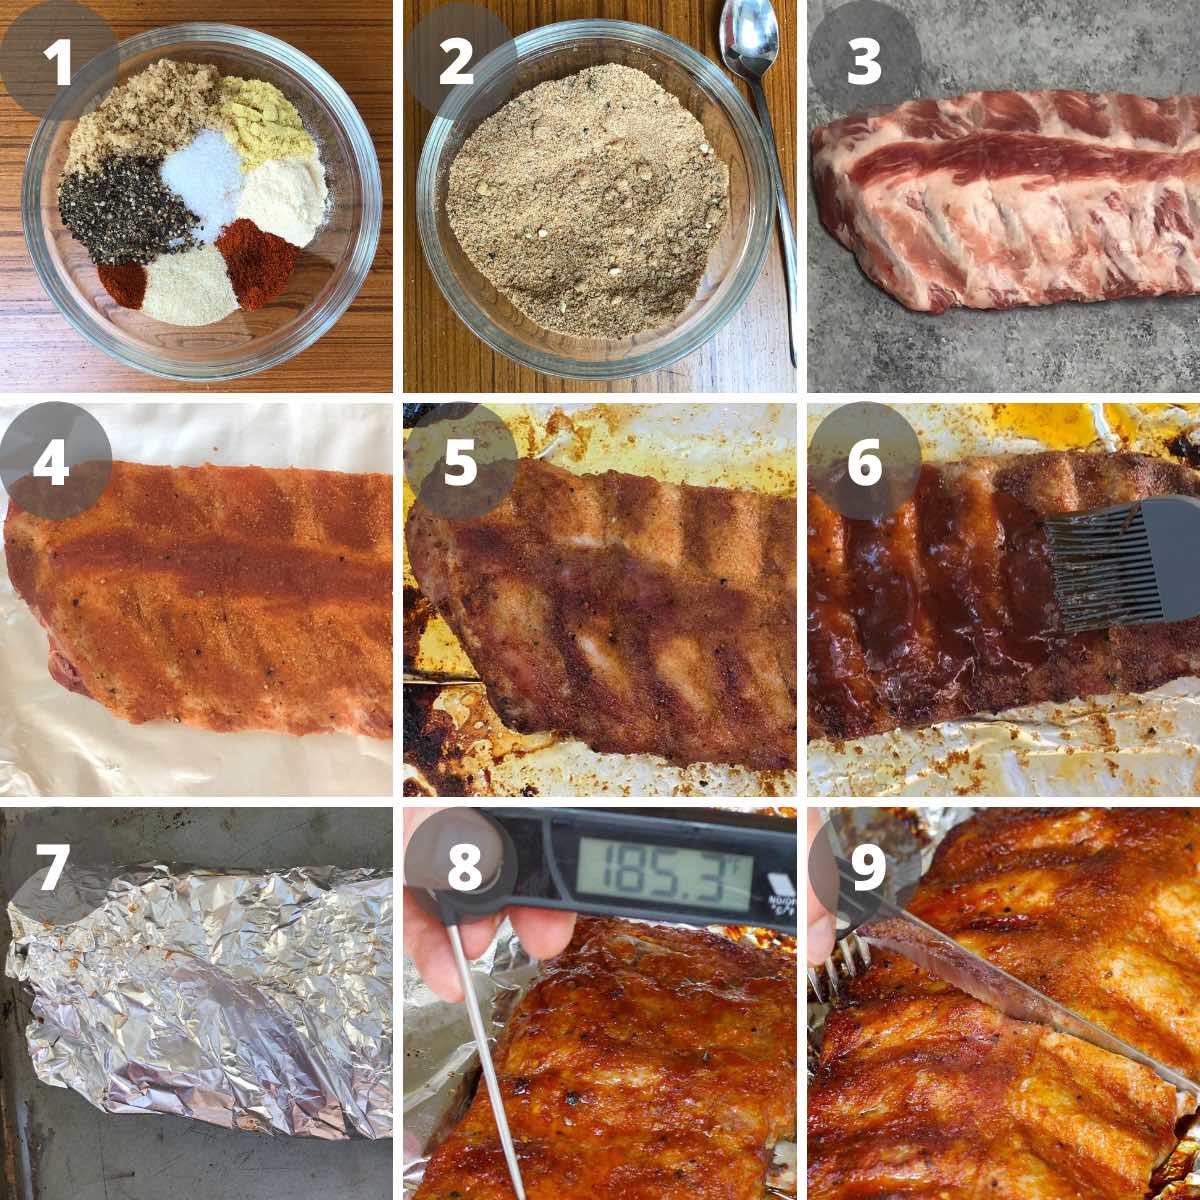 The key steps for baking ribs including seasoning, baking, saucing and checking doneness